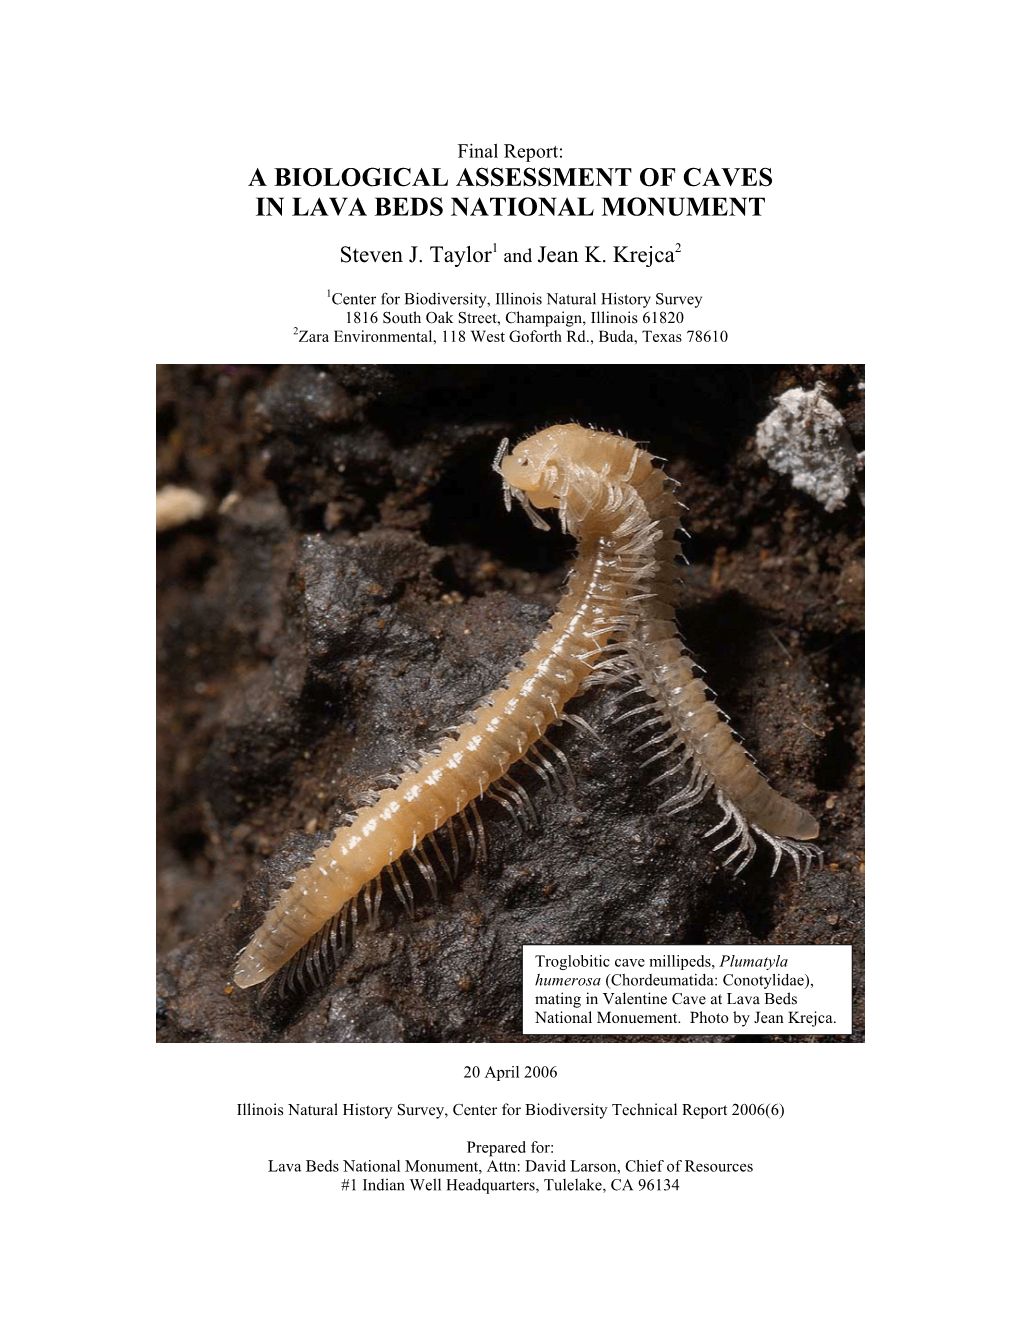 A Biological Assessment of Caves in Lava Beds National Monument